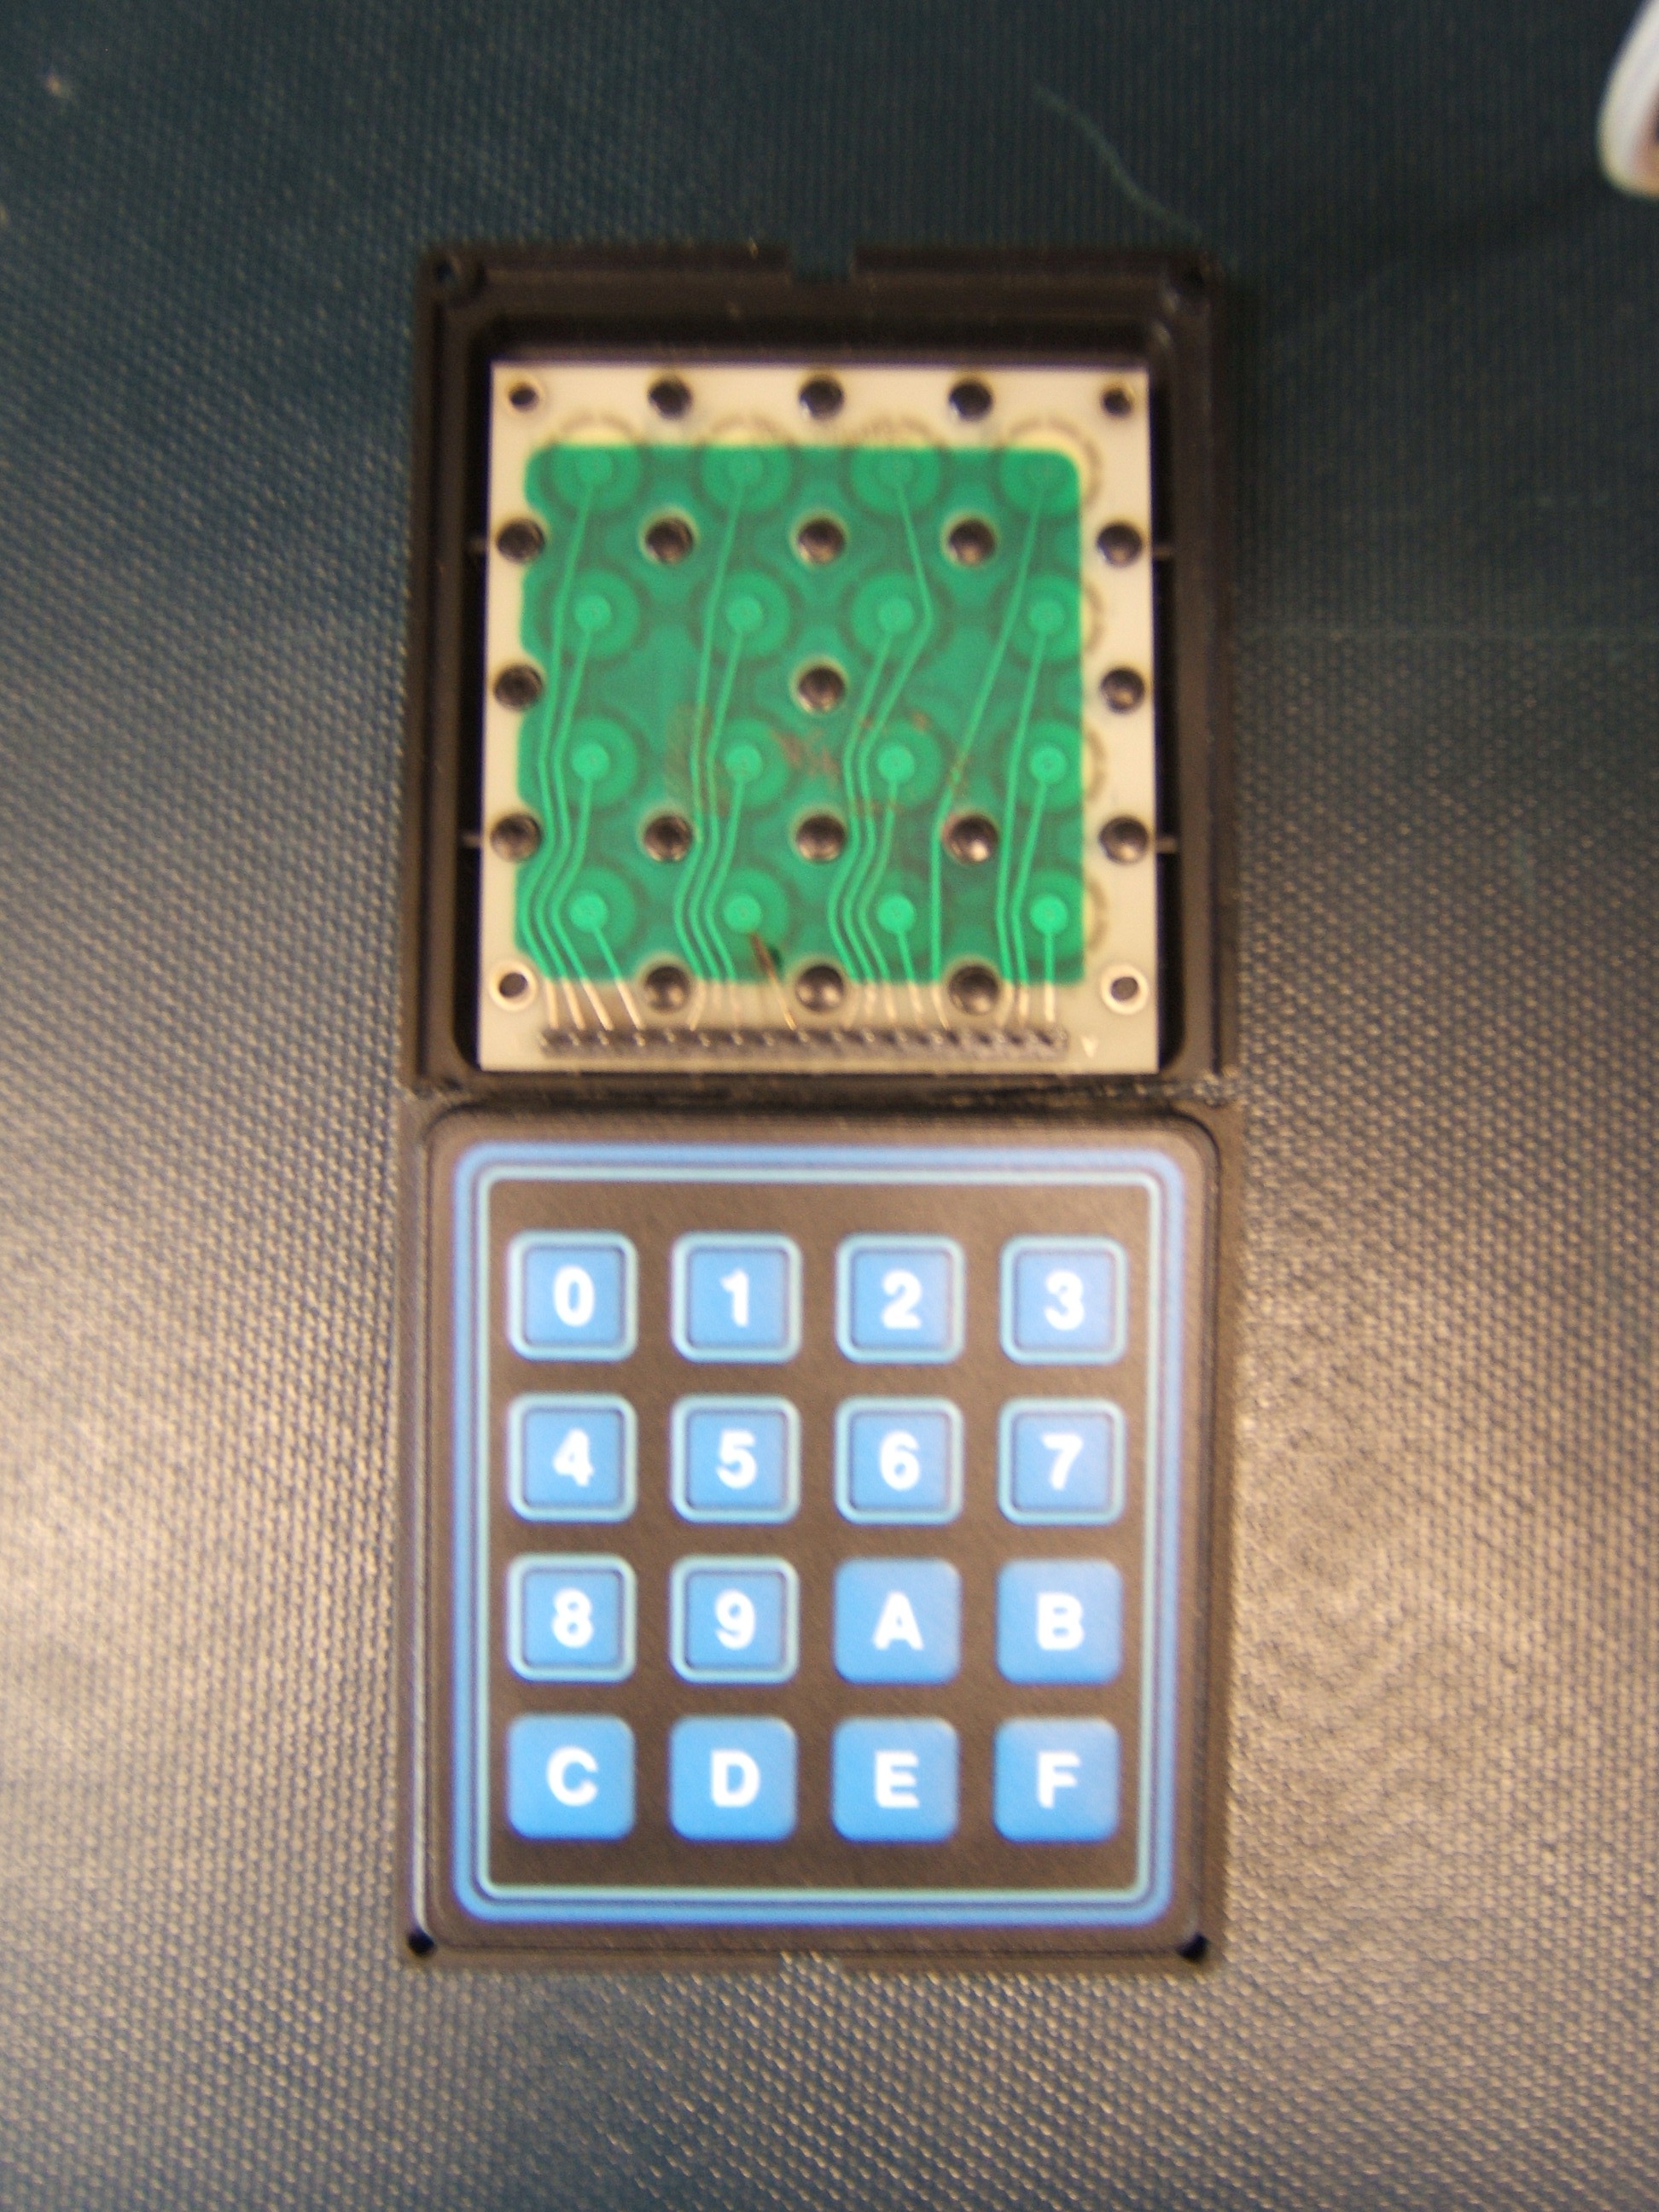 keypad alternate top and bottom view